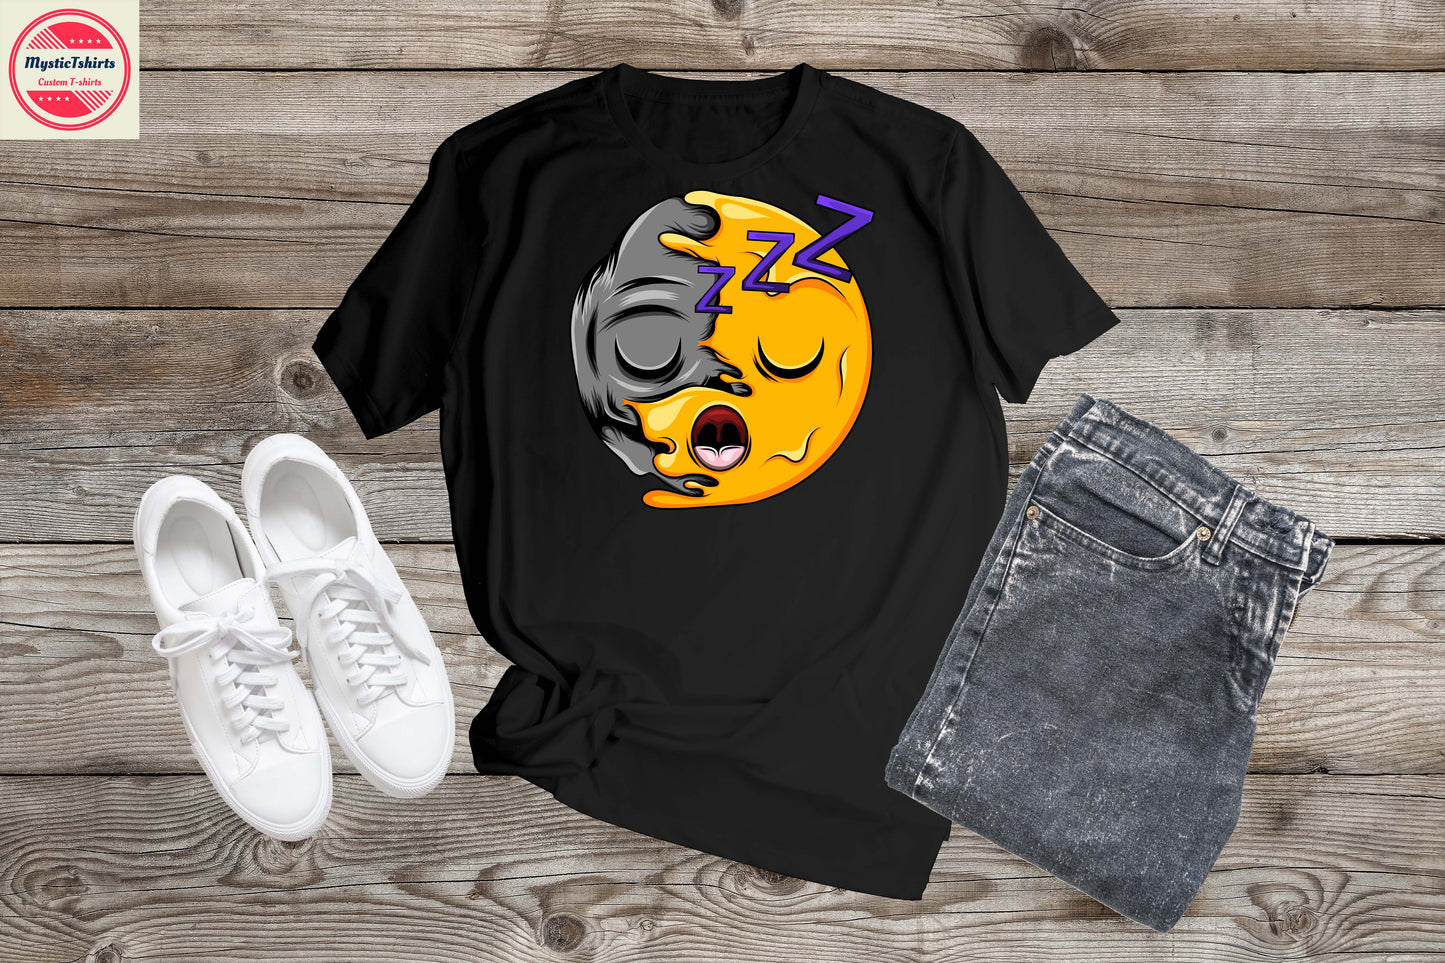 080. CRAZY FACE, Personalized T-Shirt, Custom Text, Make Your Own Shirt, Custom Tee